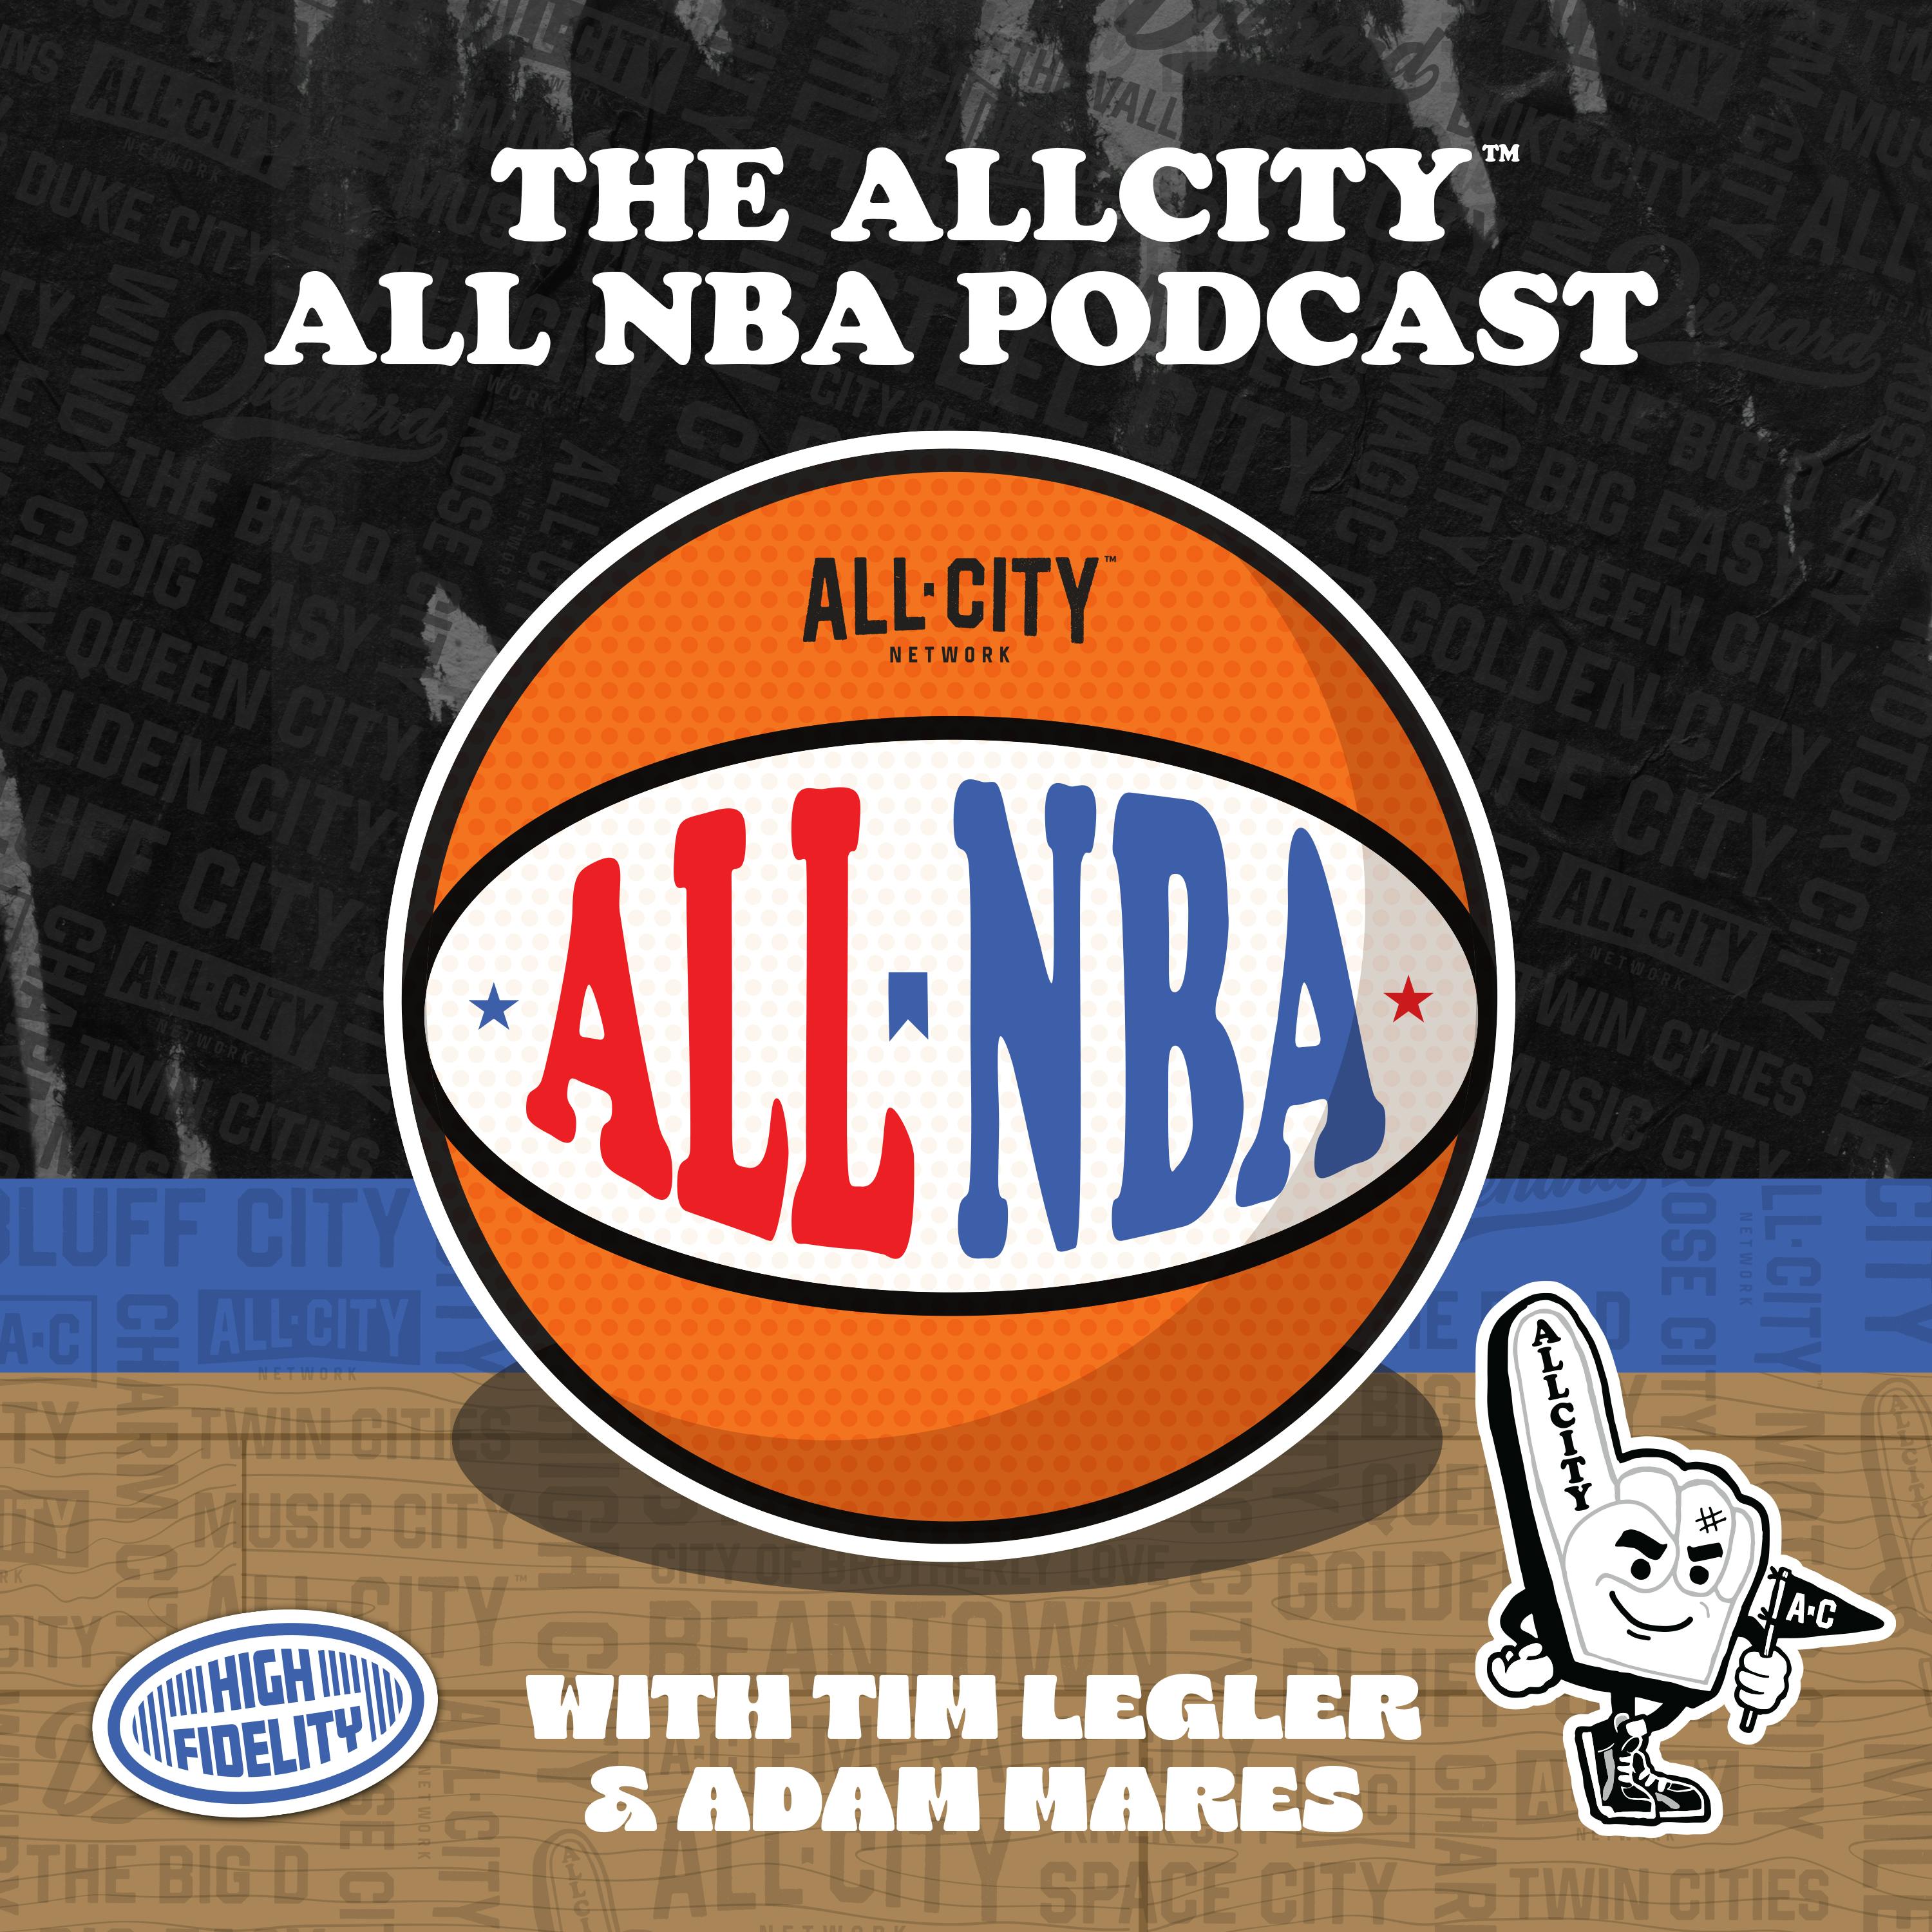 The ALL NBA Podcast: Are Zion and the New Orleans Pelicans ready to make the leap?